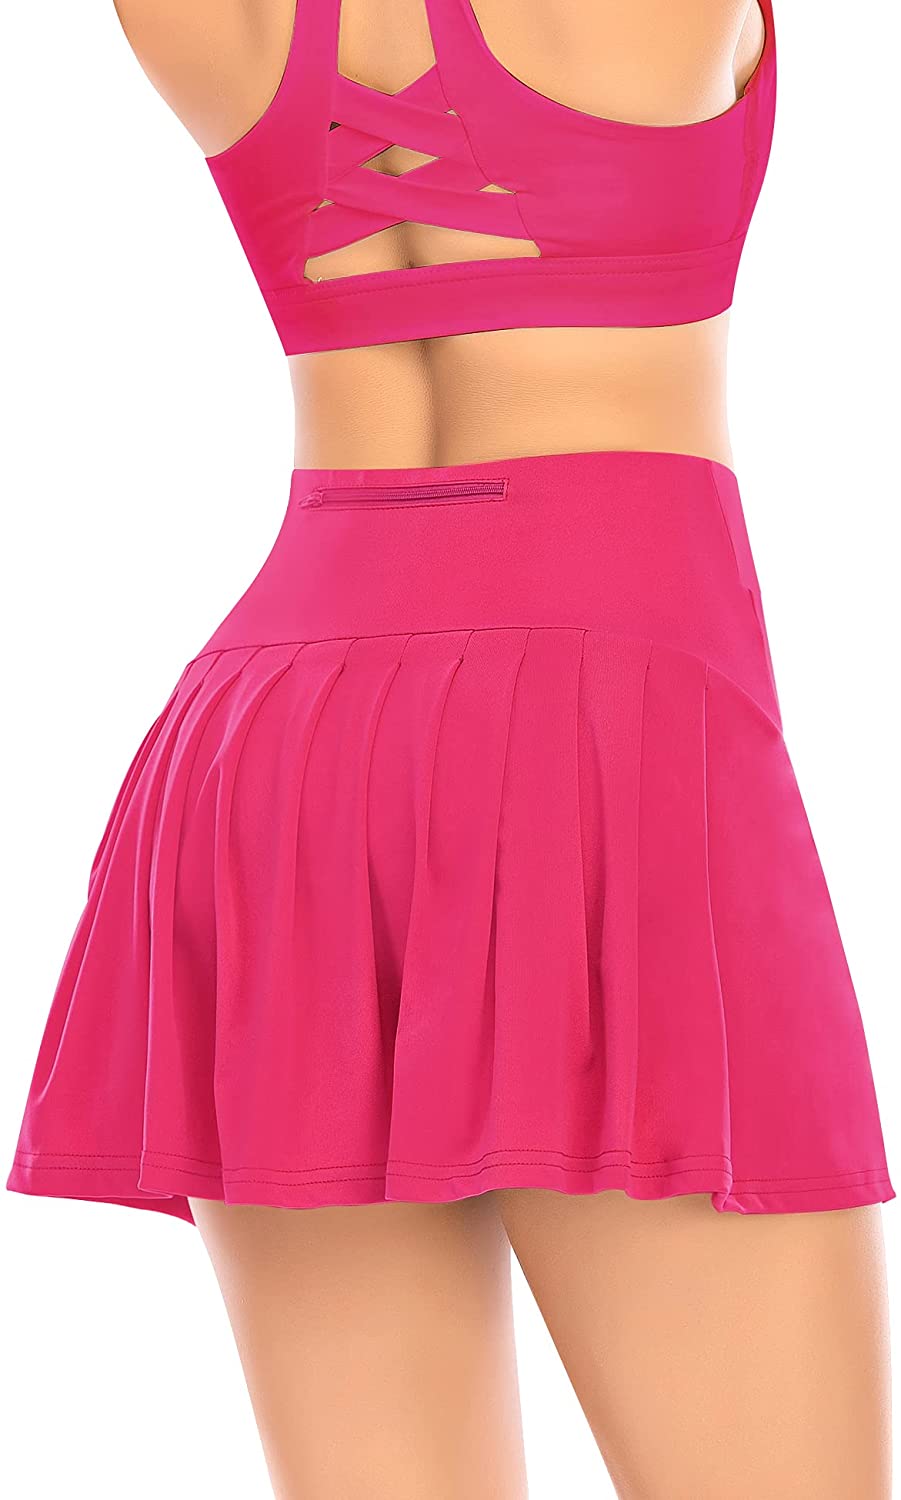 Pleated Tennis Skirt for Women with Shorts Athletic Golf Skorts